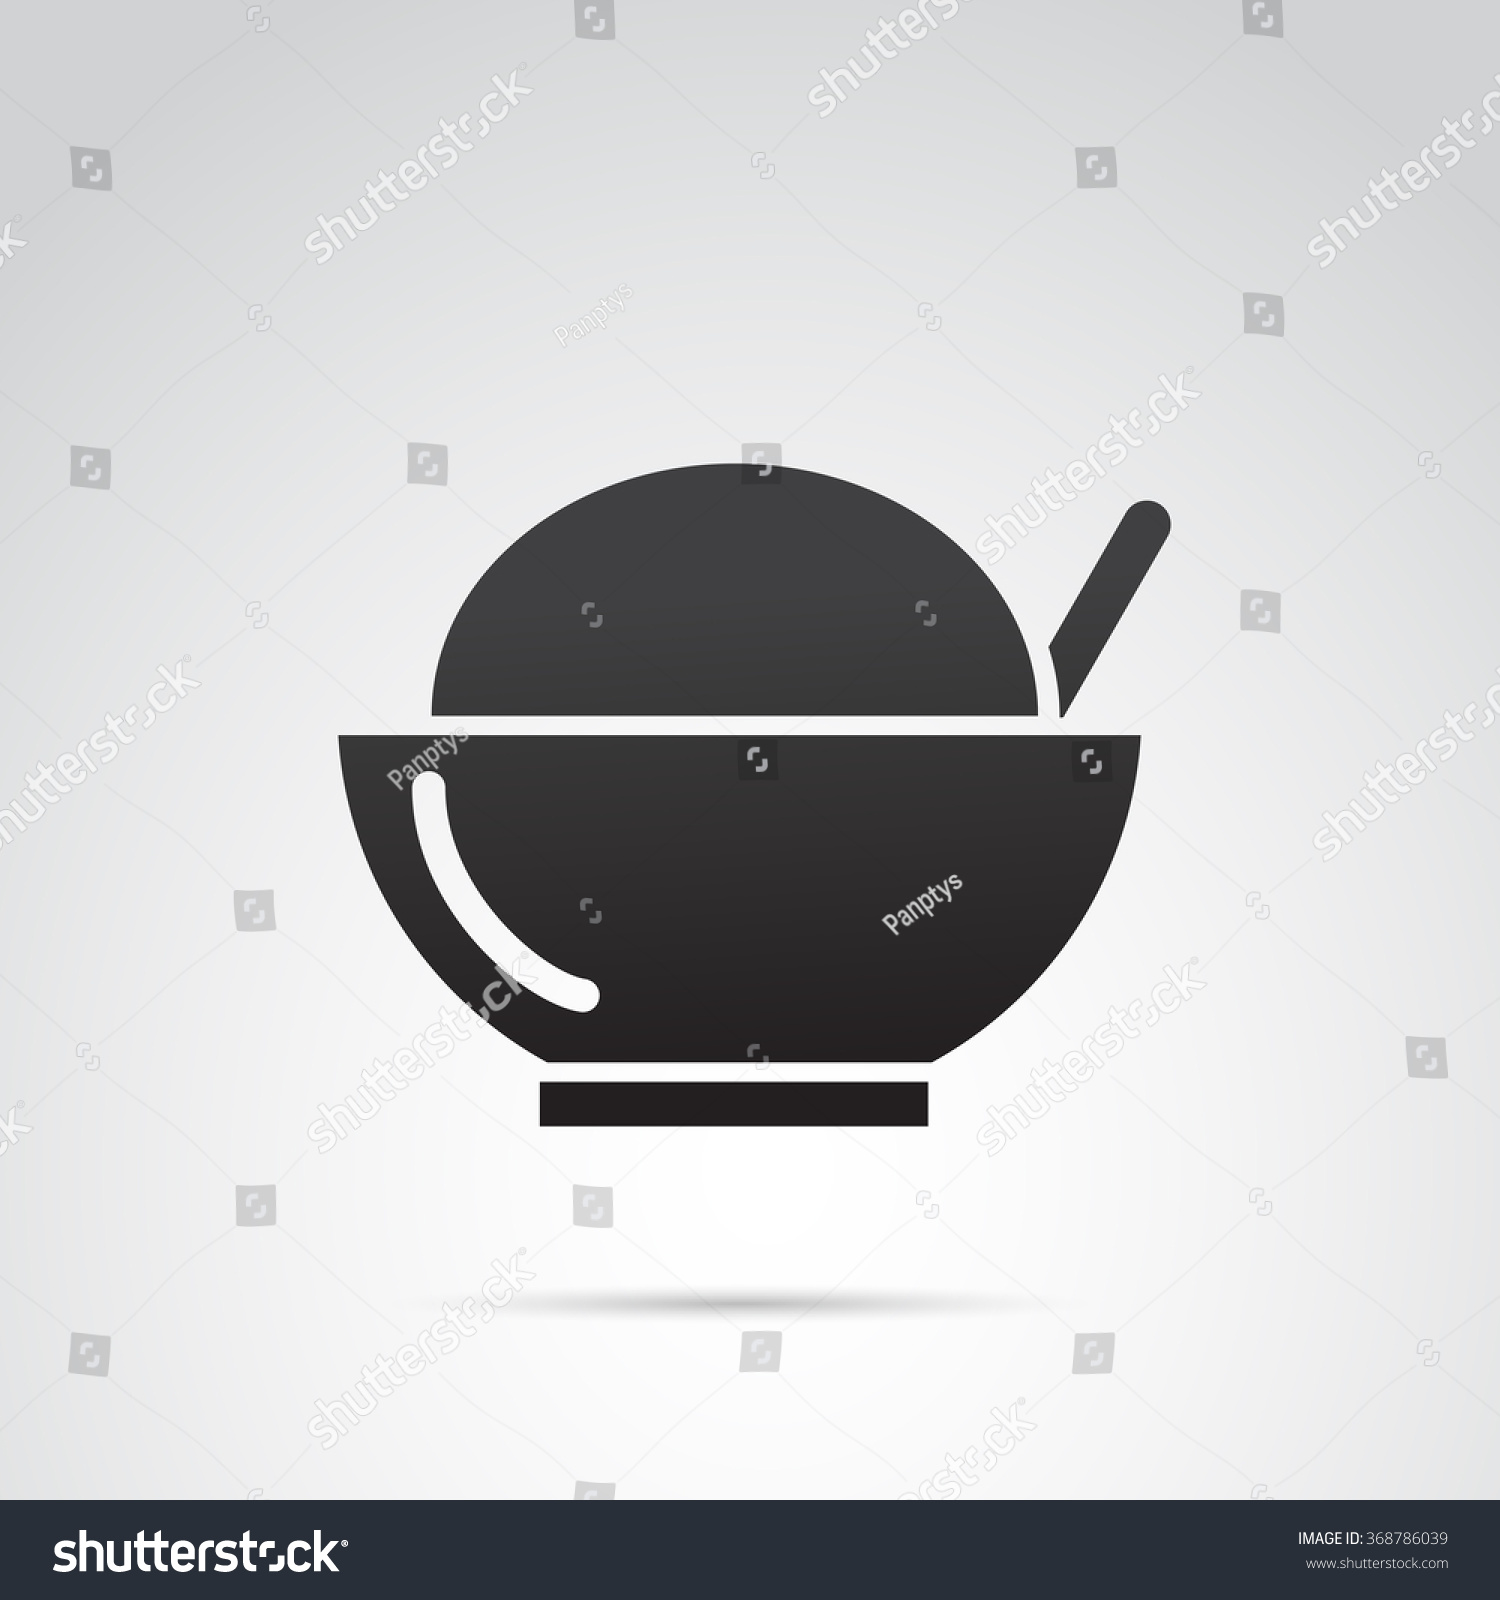 Monochrome japanese bowl of rice icon on white Vector Image